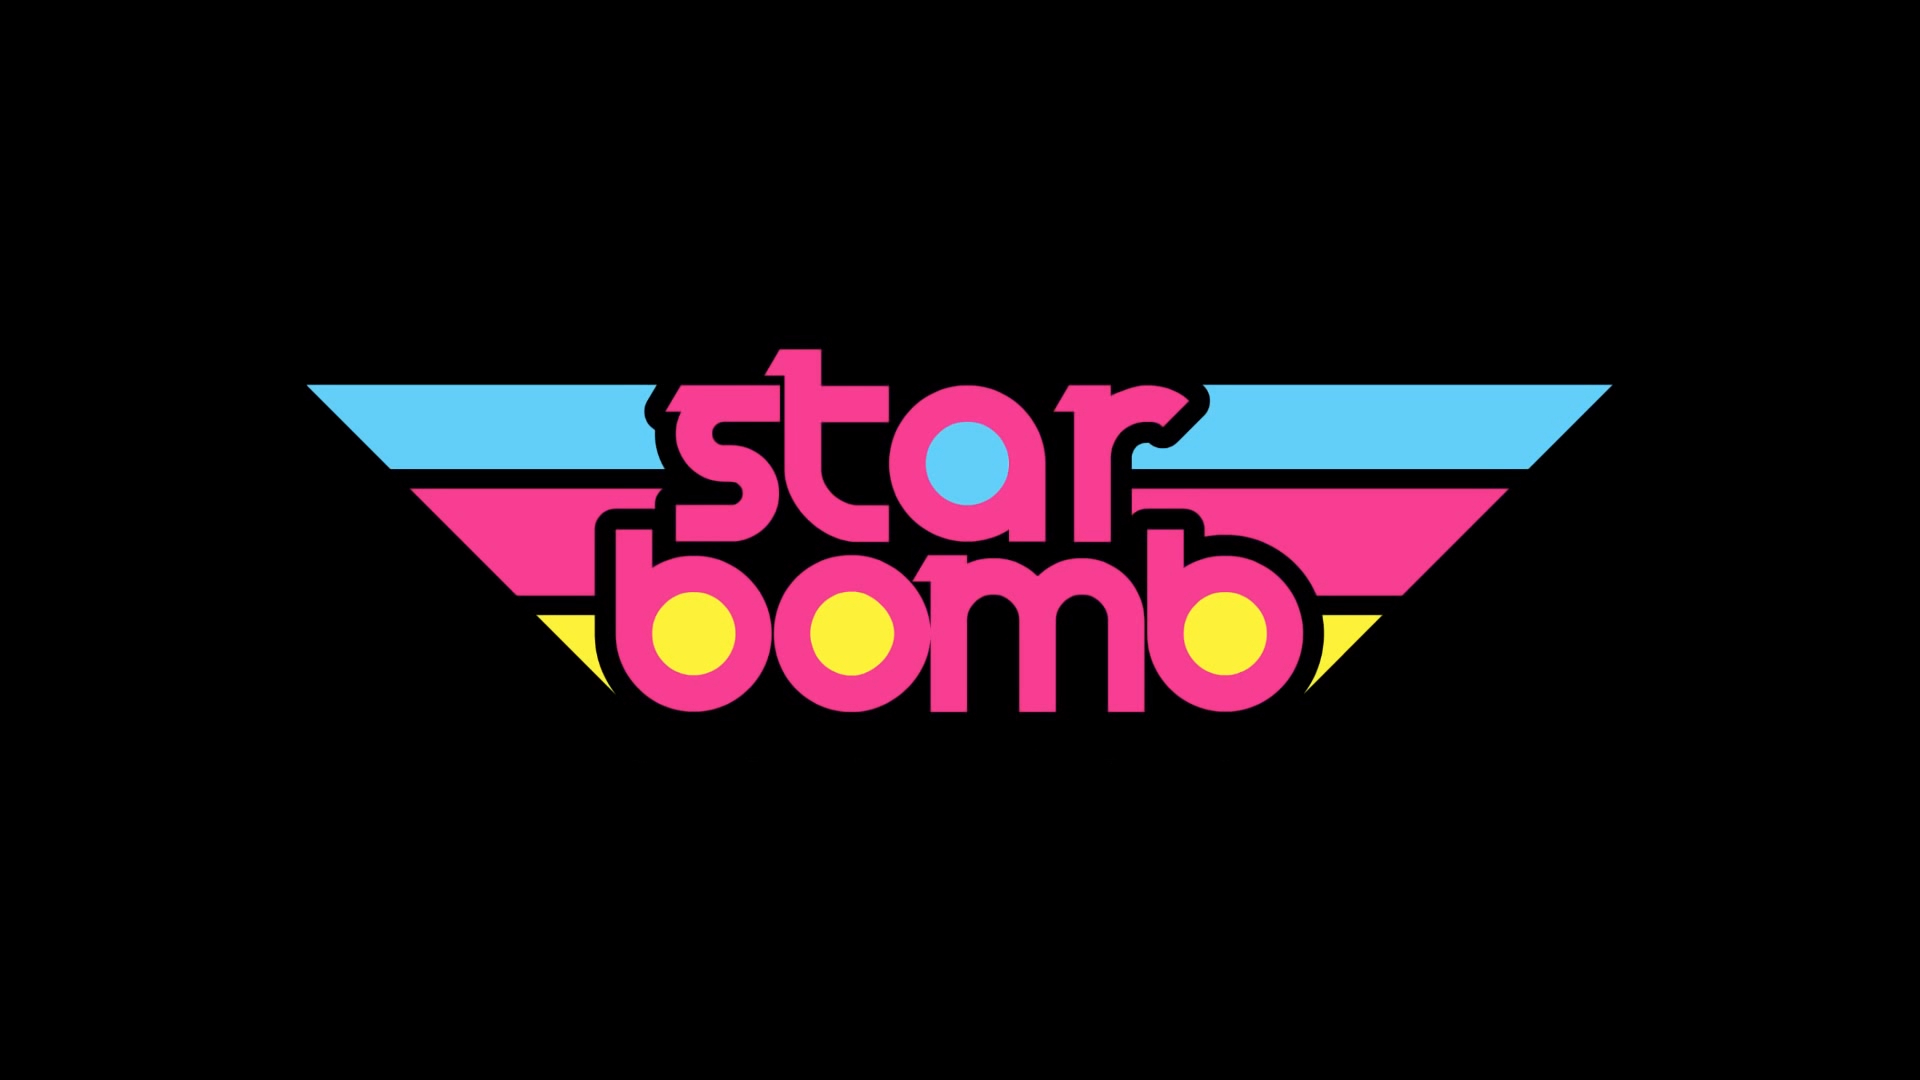 Quickie Starbomb wallpaper   couldnt find one so I threw this 1920x1080